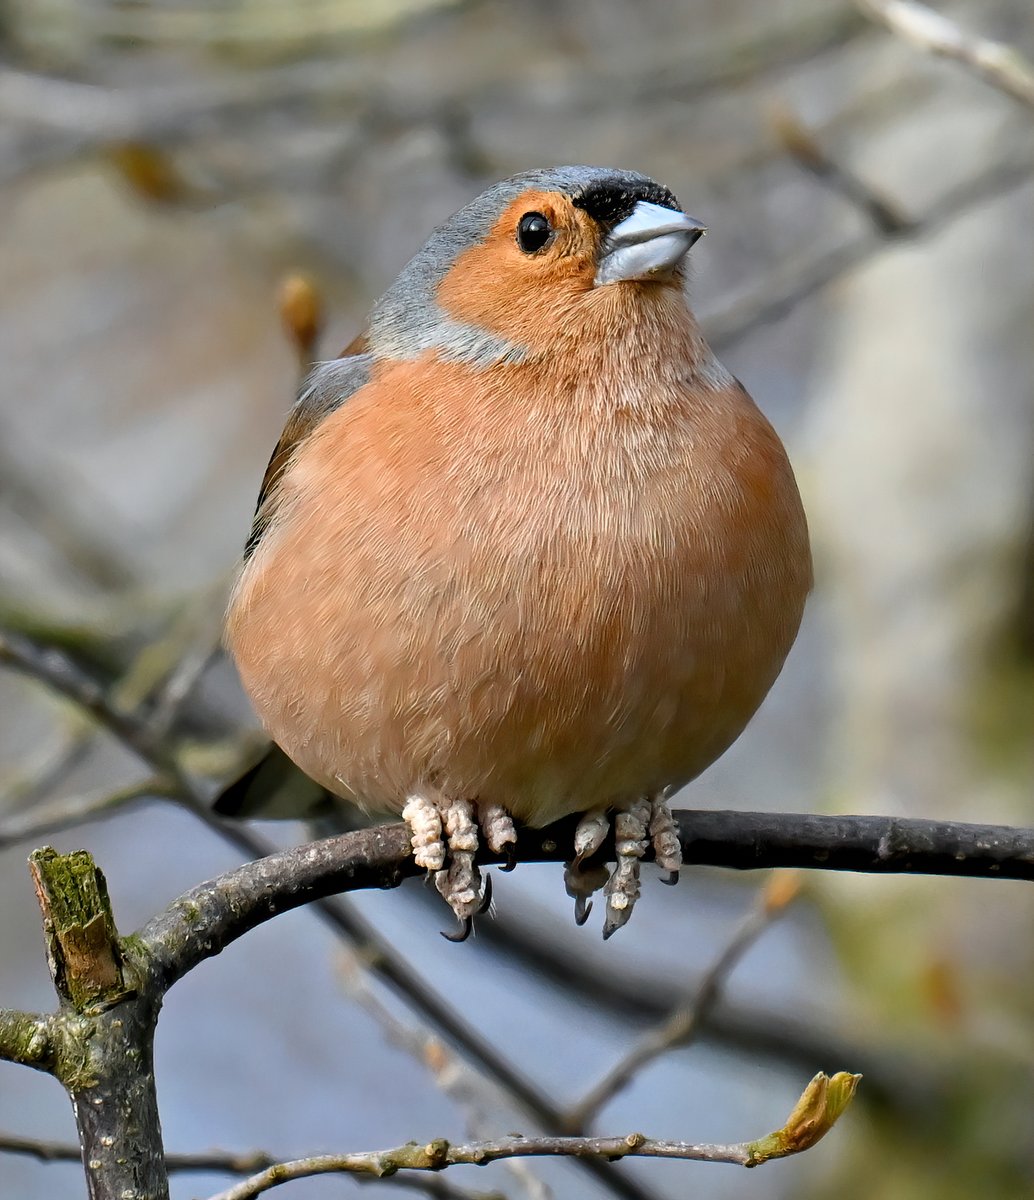 Male Chaffinch sitting proudly. 😊🐦